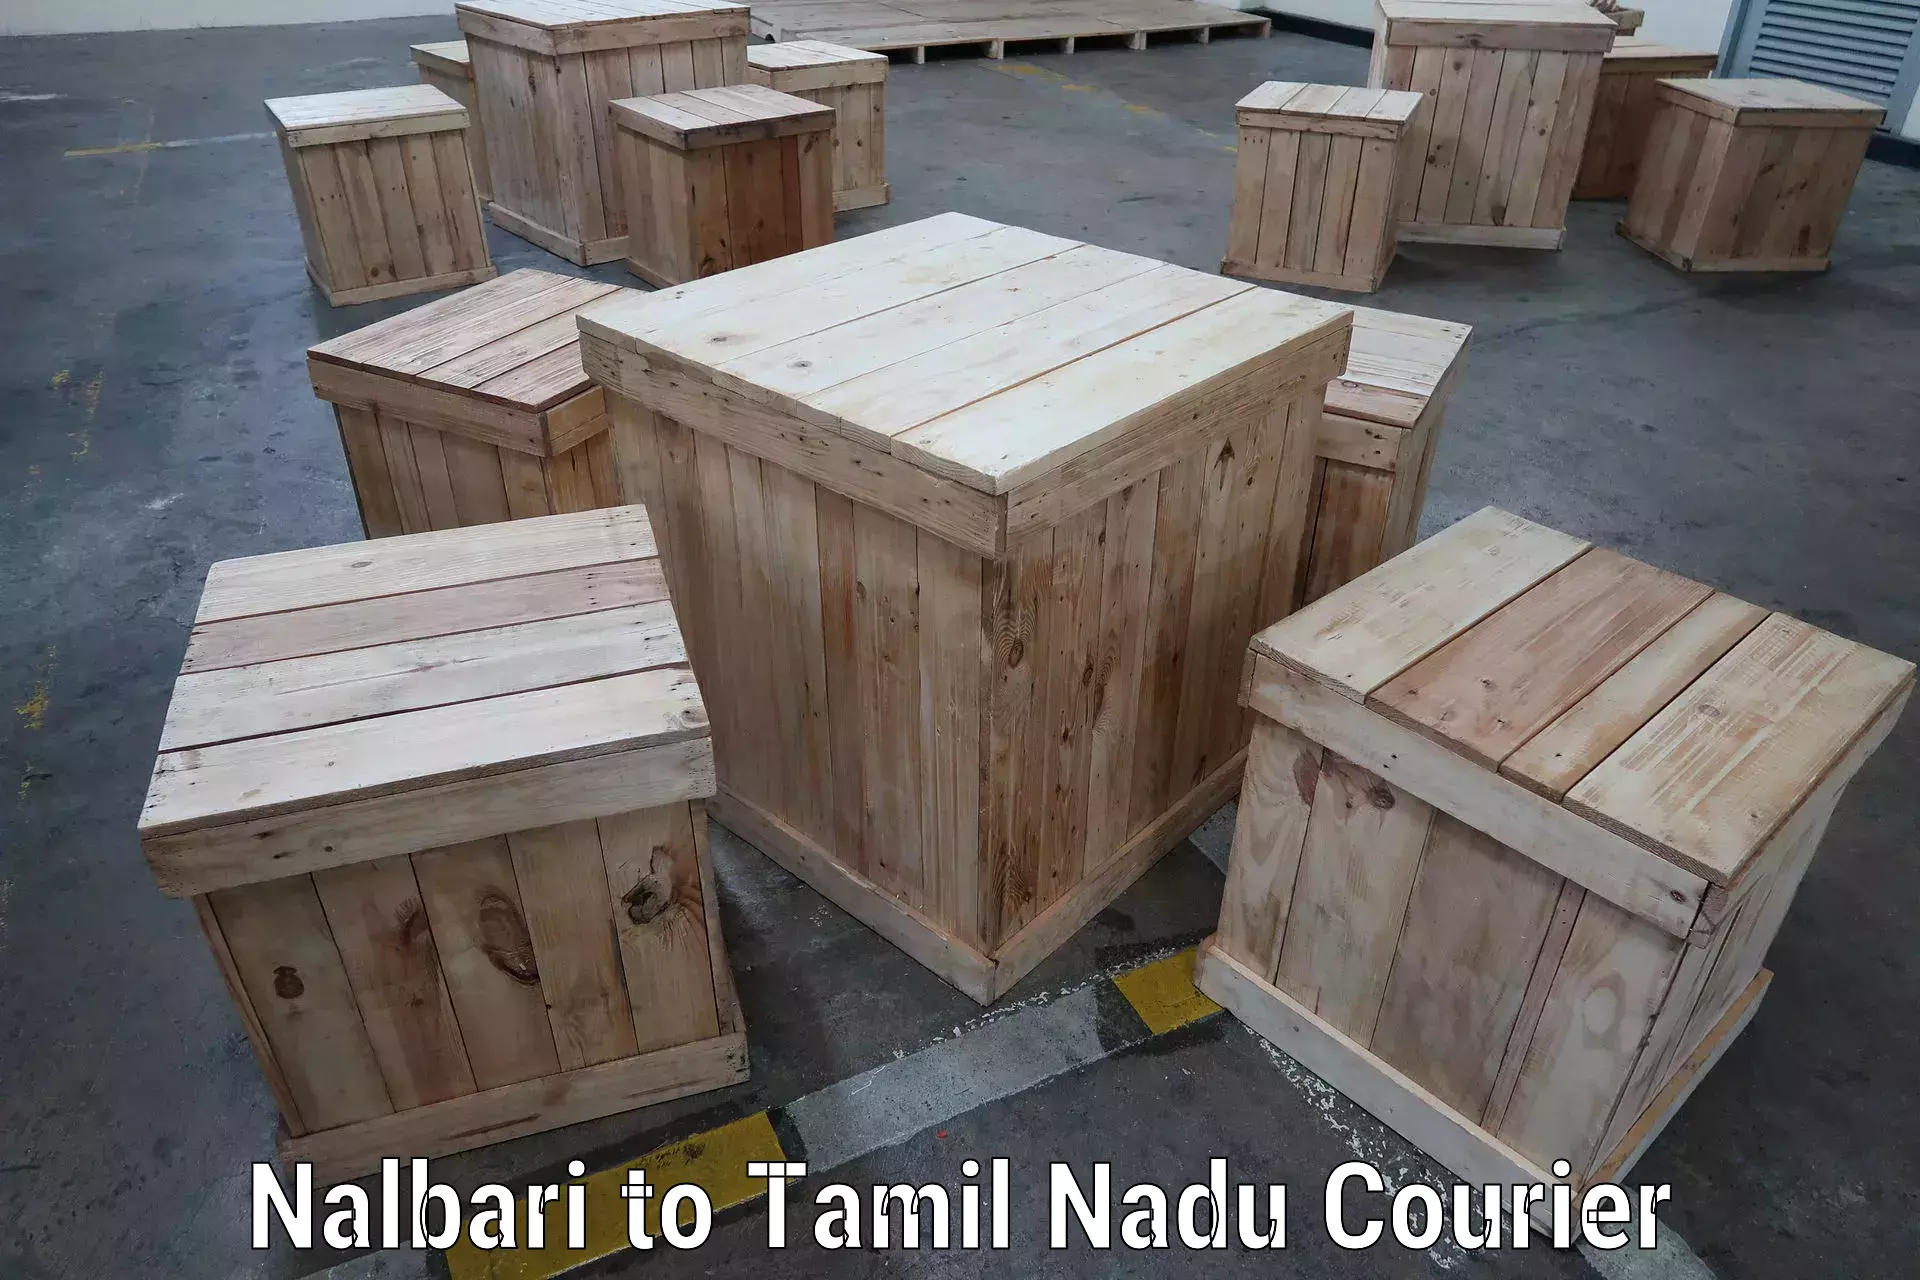 Tailored delivery services Nalbari to Ennore Port Chennai